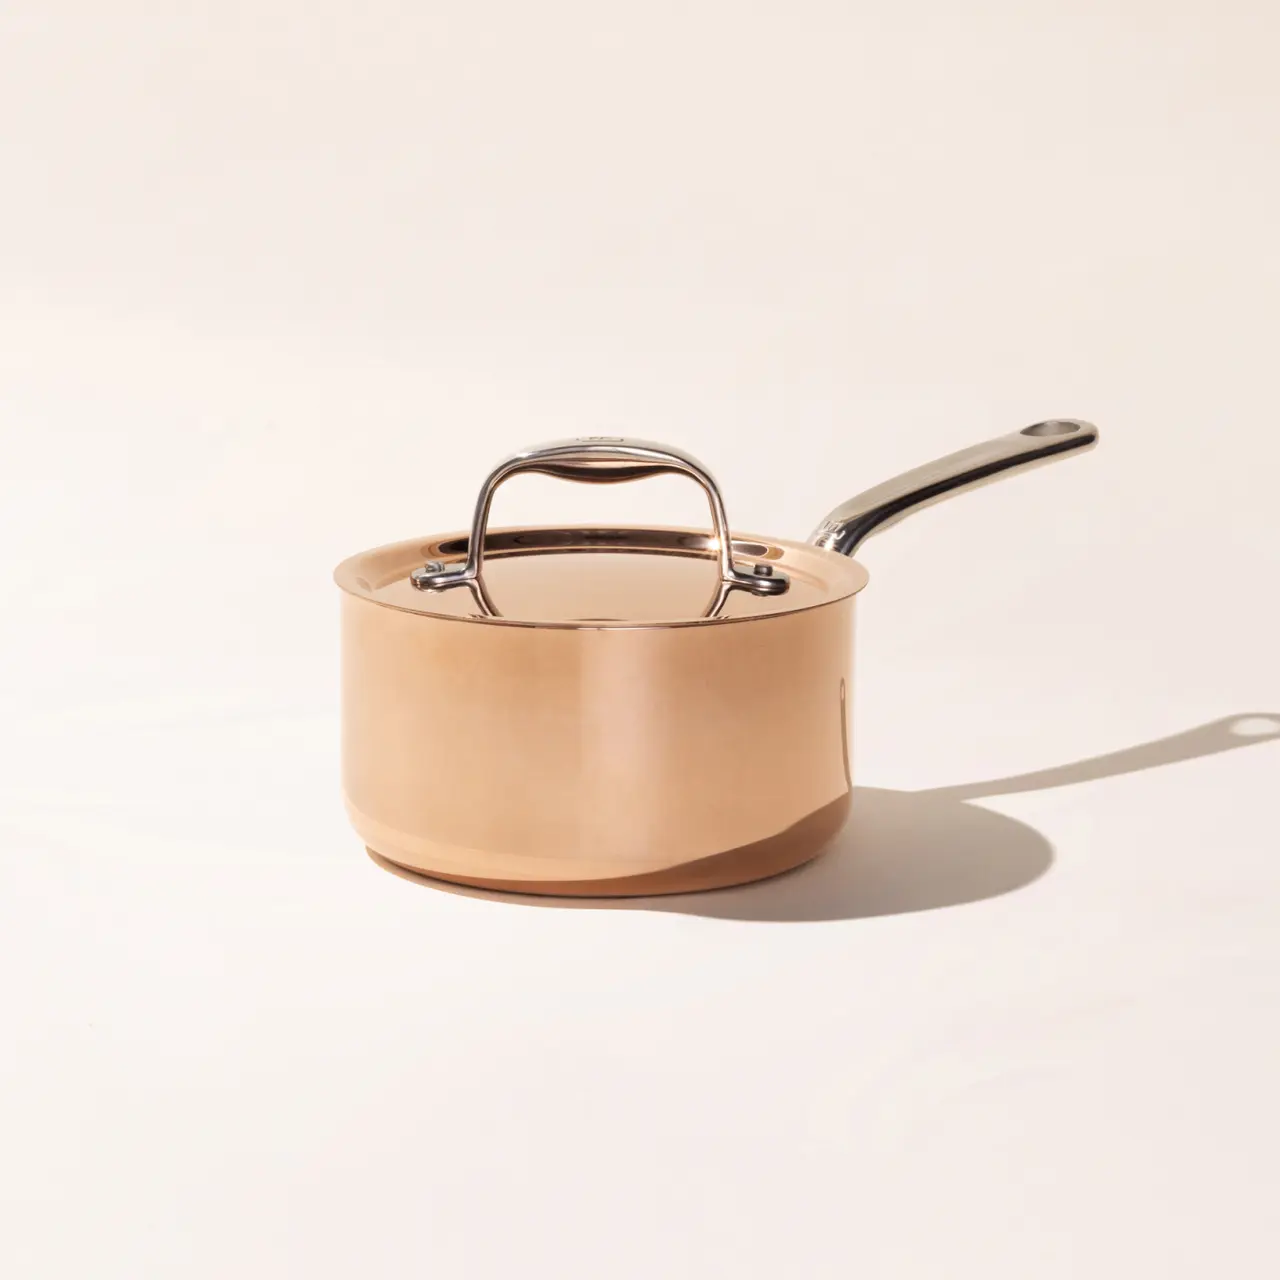 A copper saucepan with a silver handle and lid sits against a light neutral background, casting a soft shadow to the right.